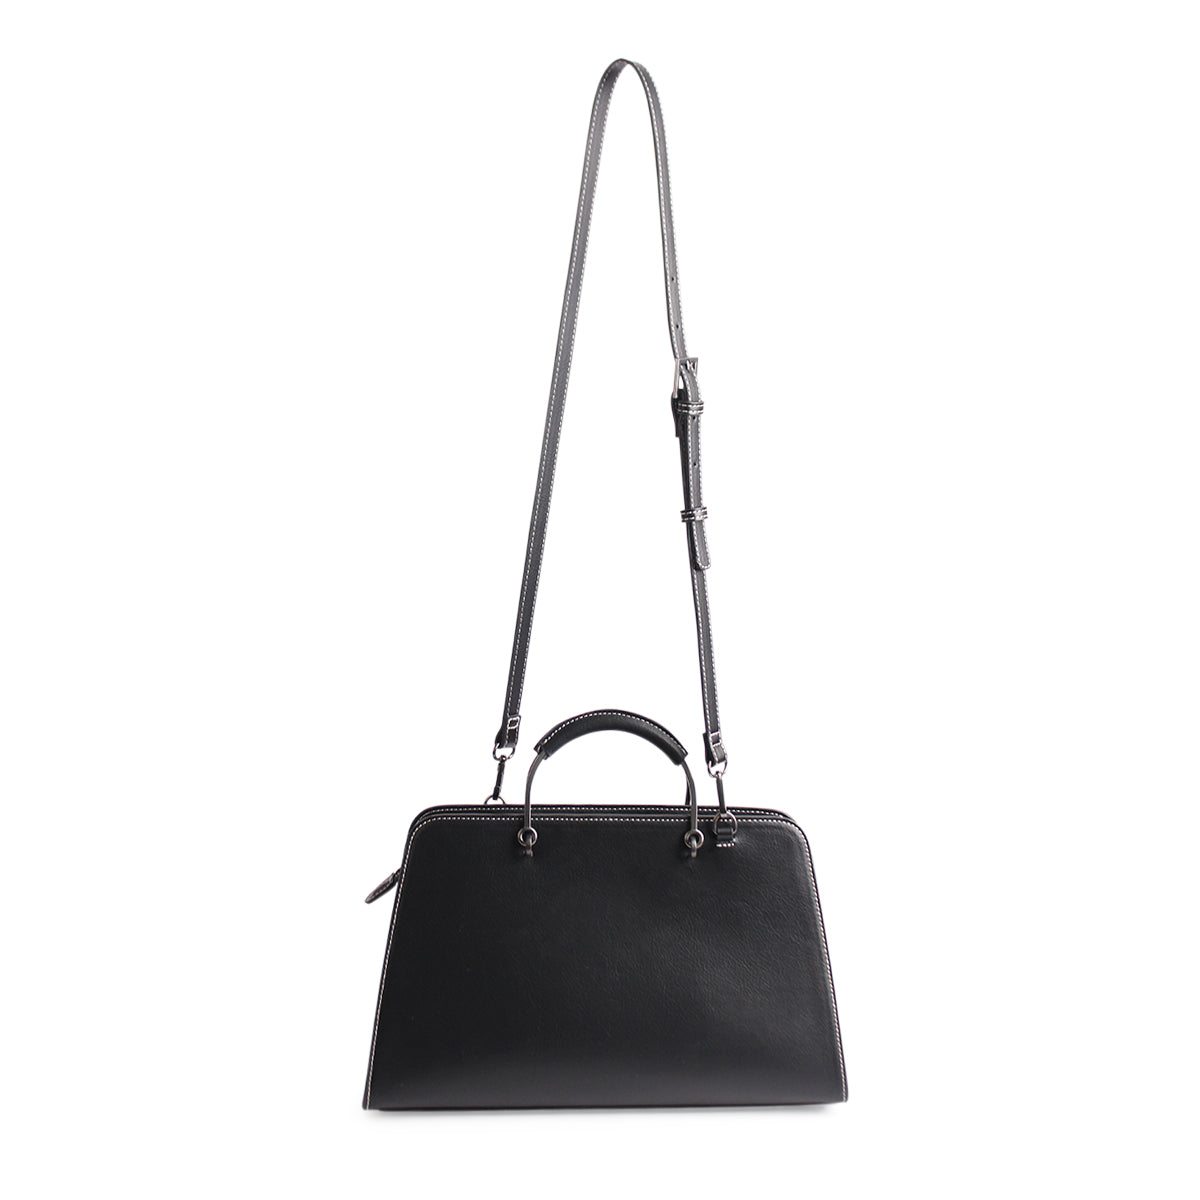 PM Becca Tote Black Recycled